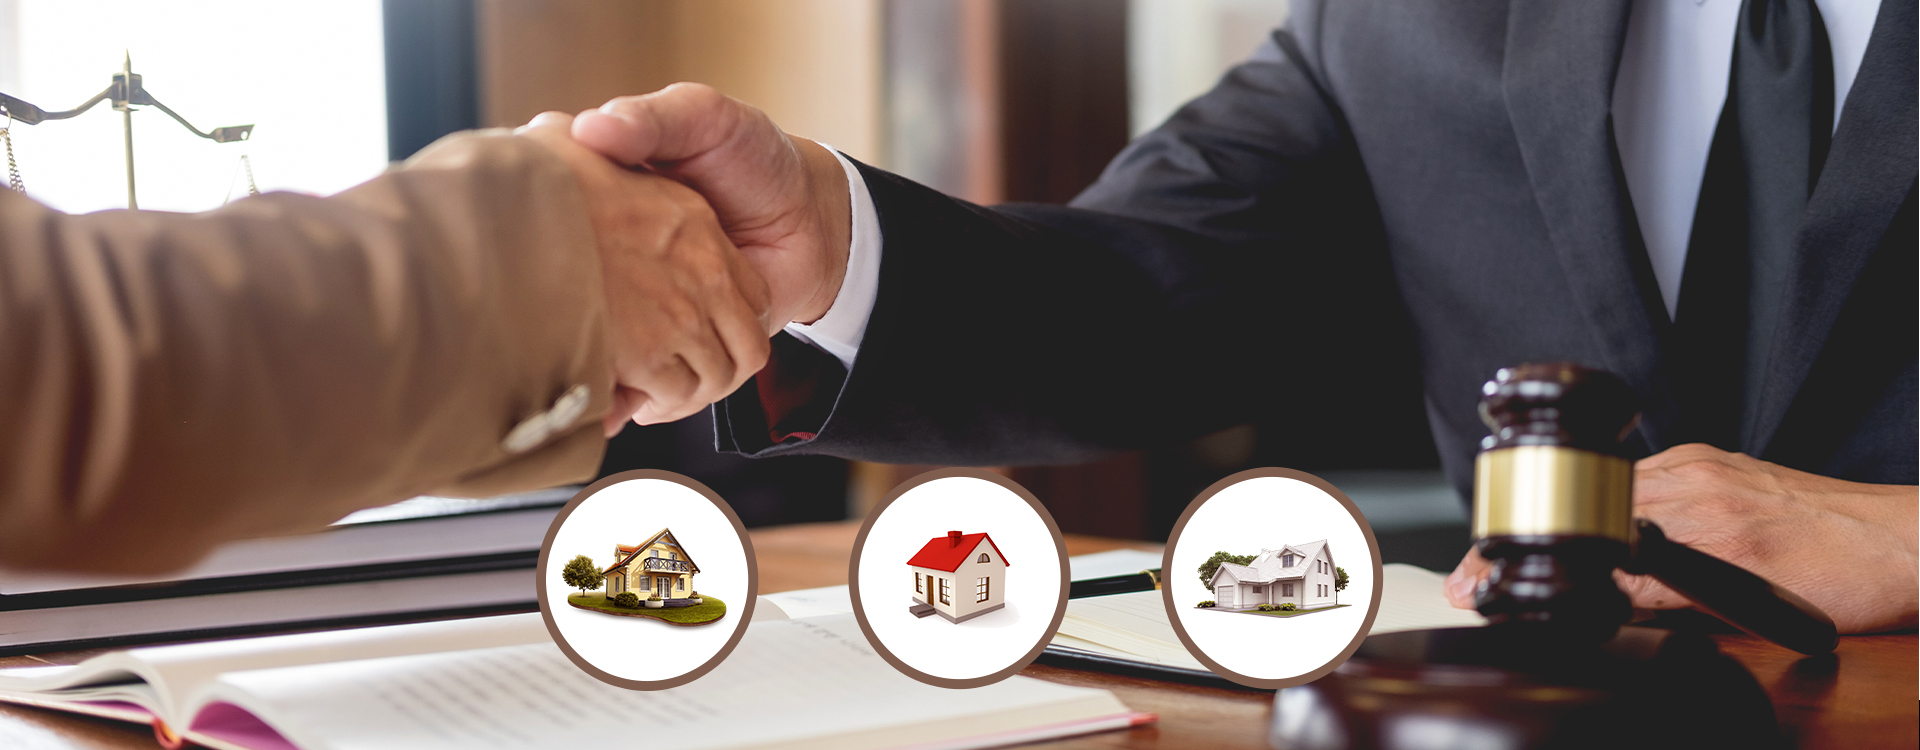 Probate Attorney Selling Houses. All You Need To Know